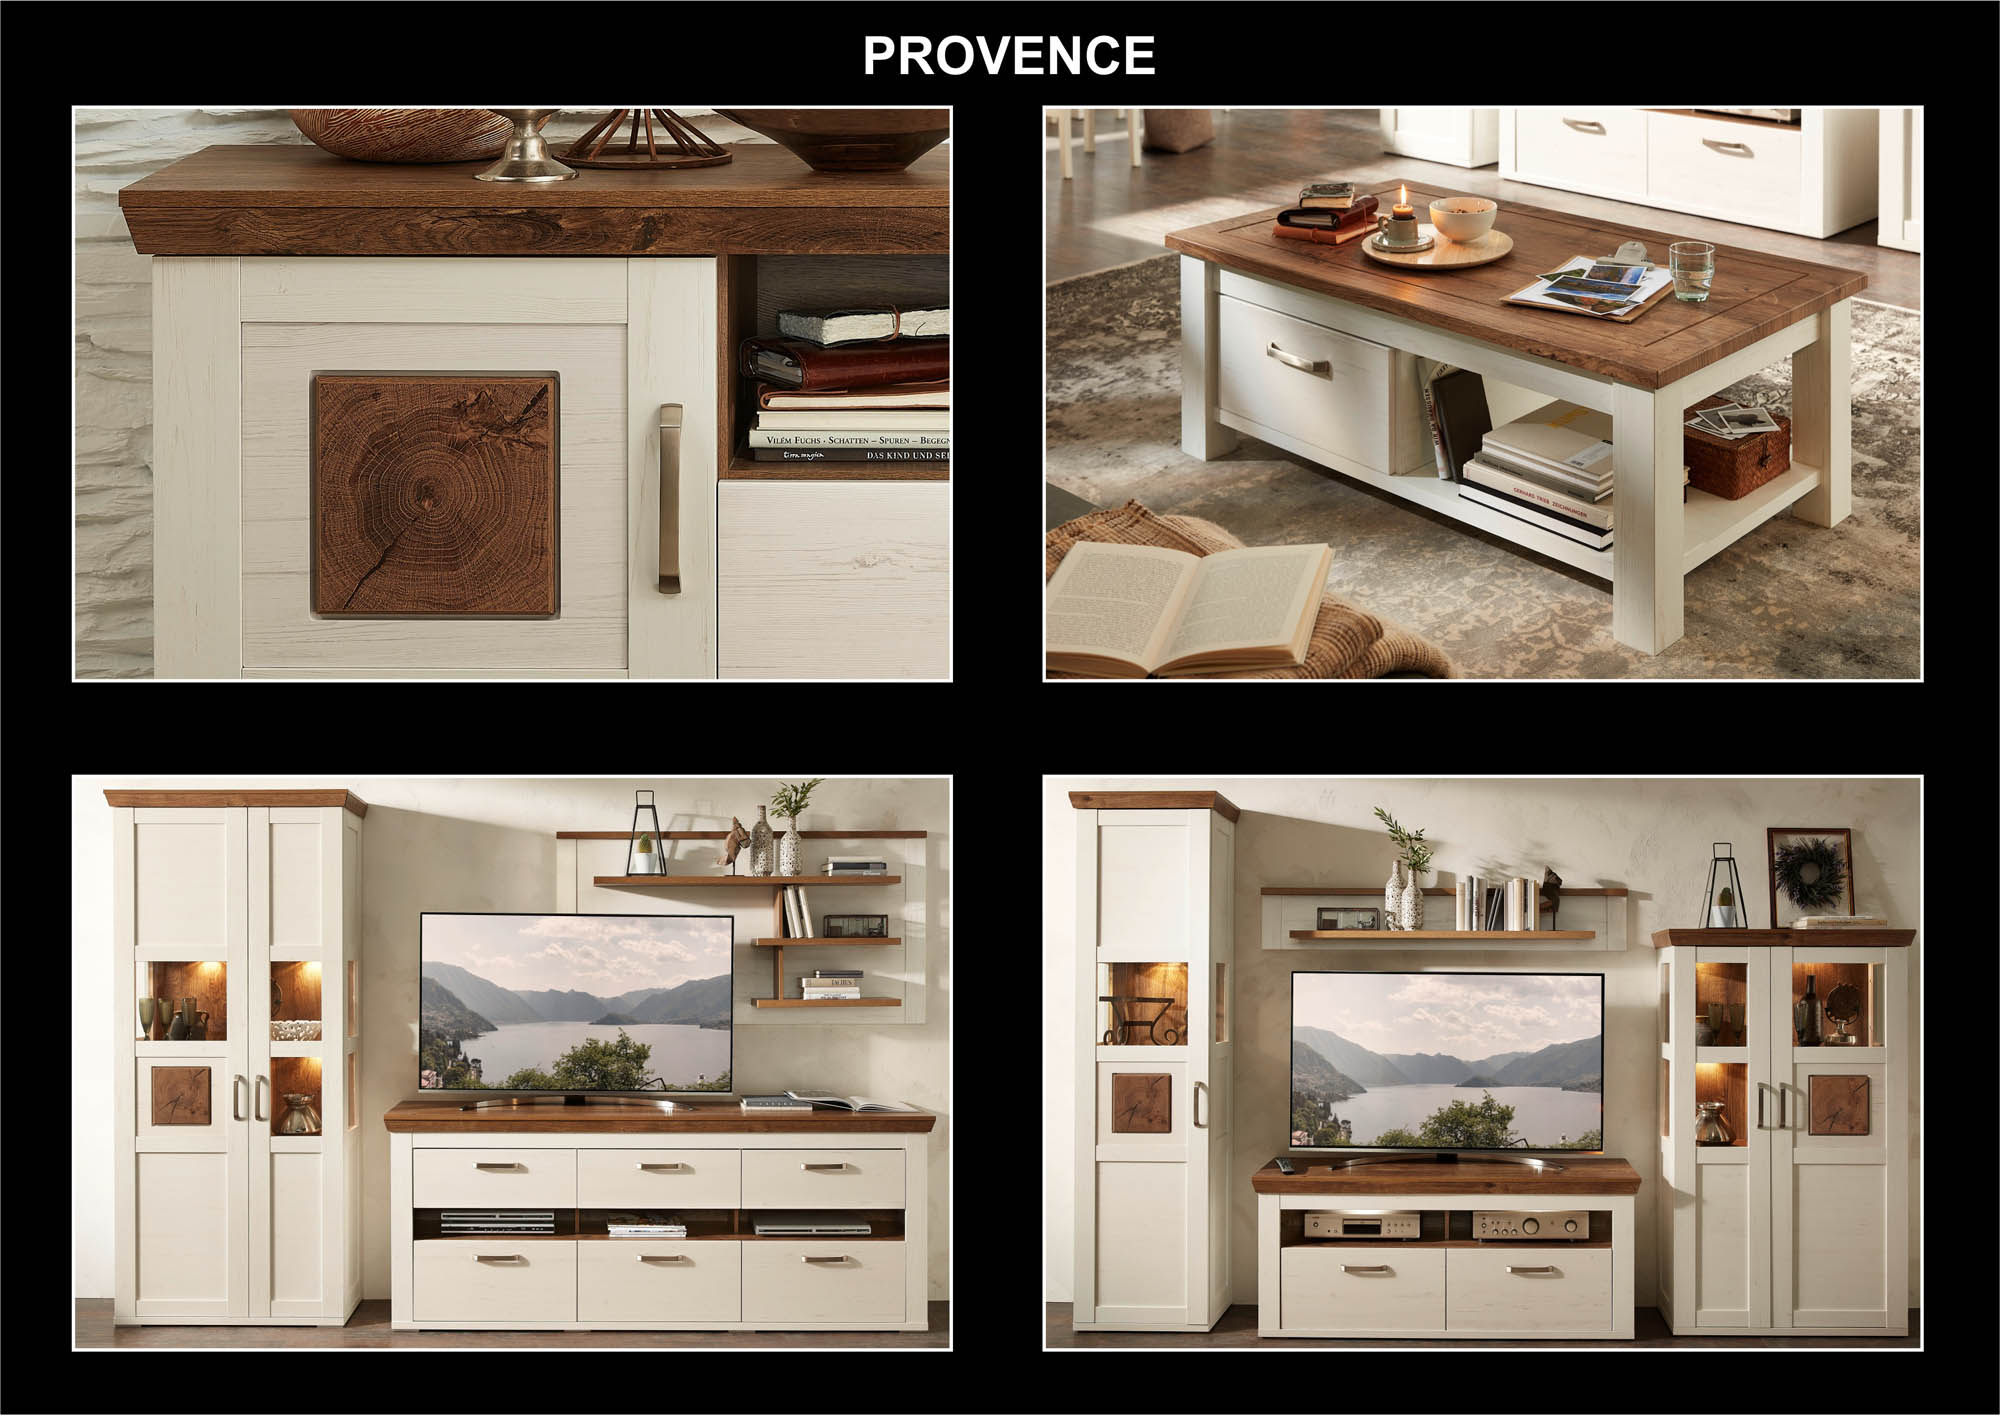 Wohnconcept Sideboard Provence in Pinie hell